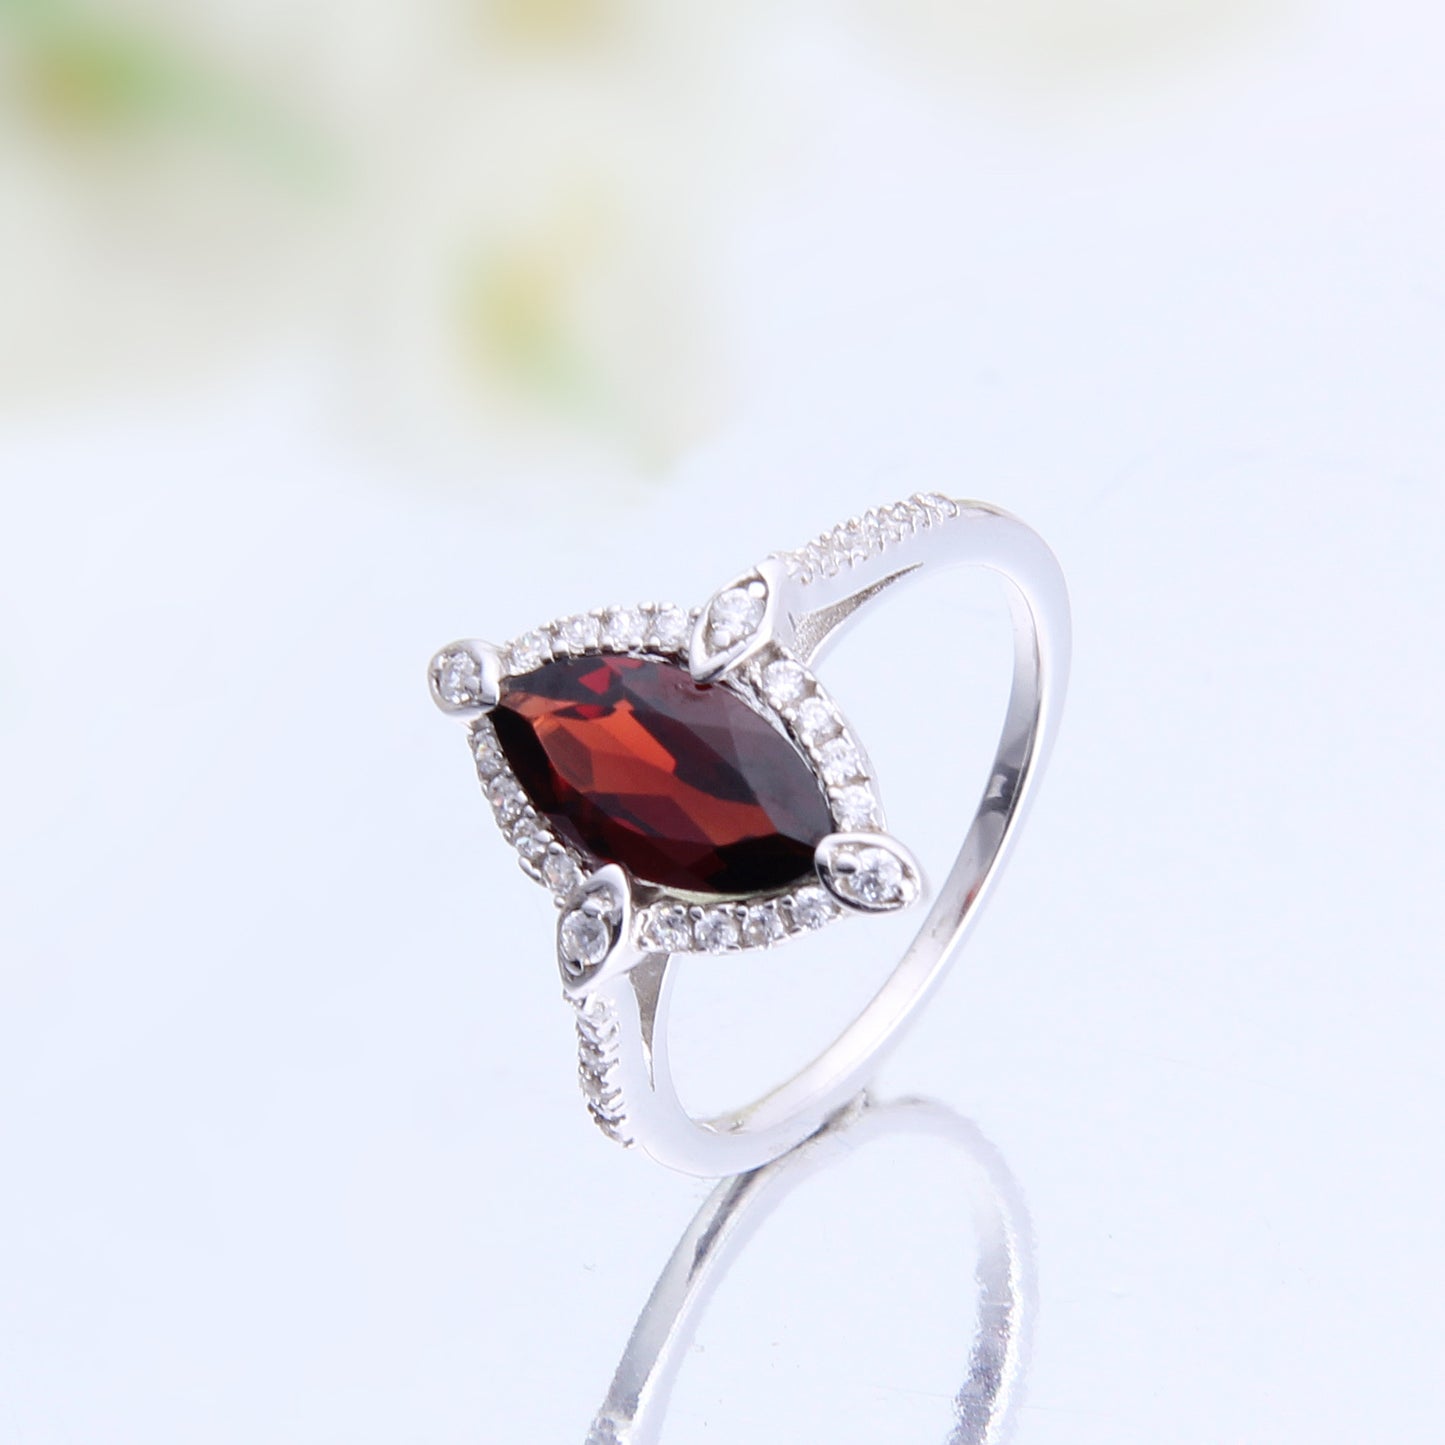 Luxurious Natural Garnet s925 Silver Inlaided Ring for Women